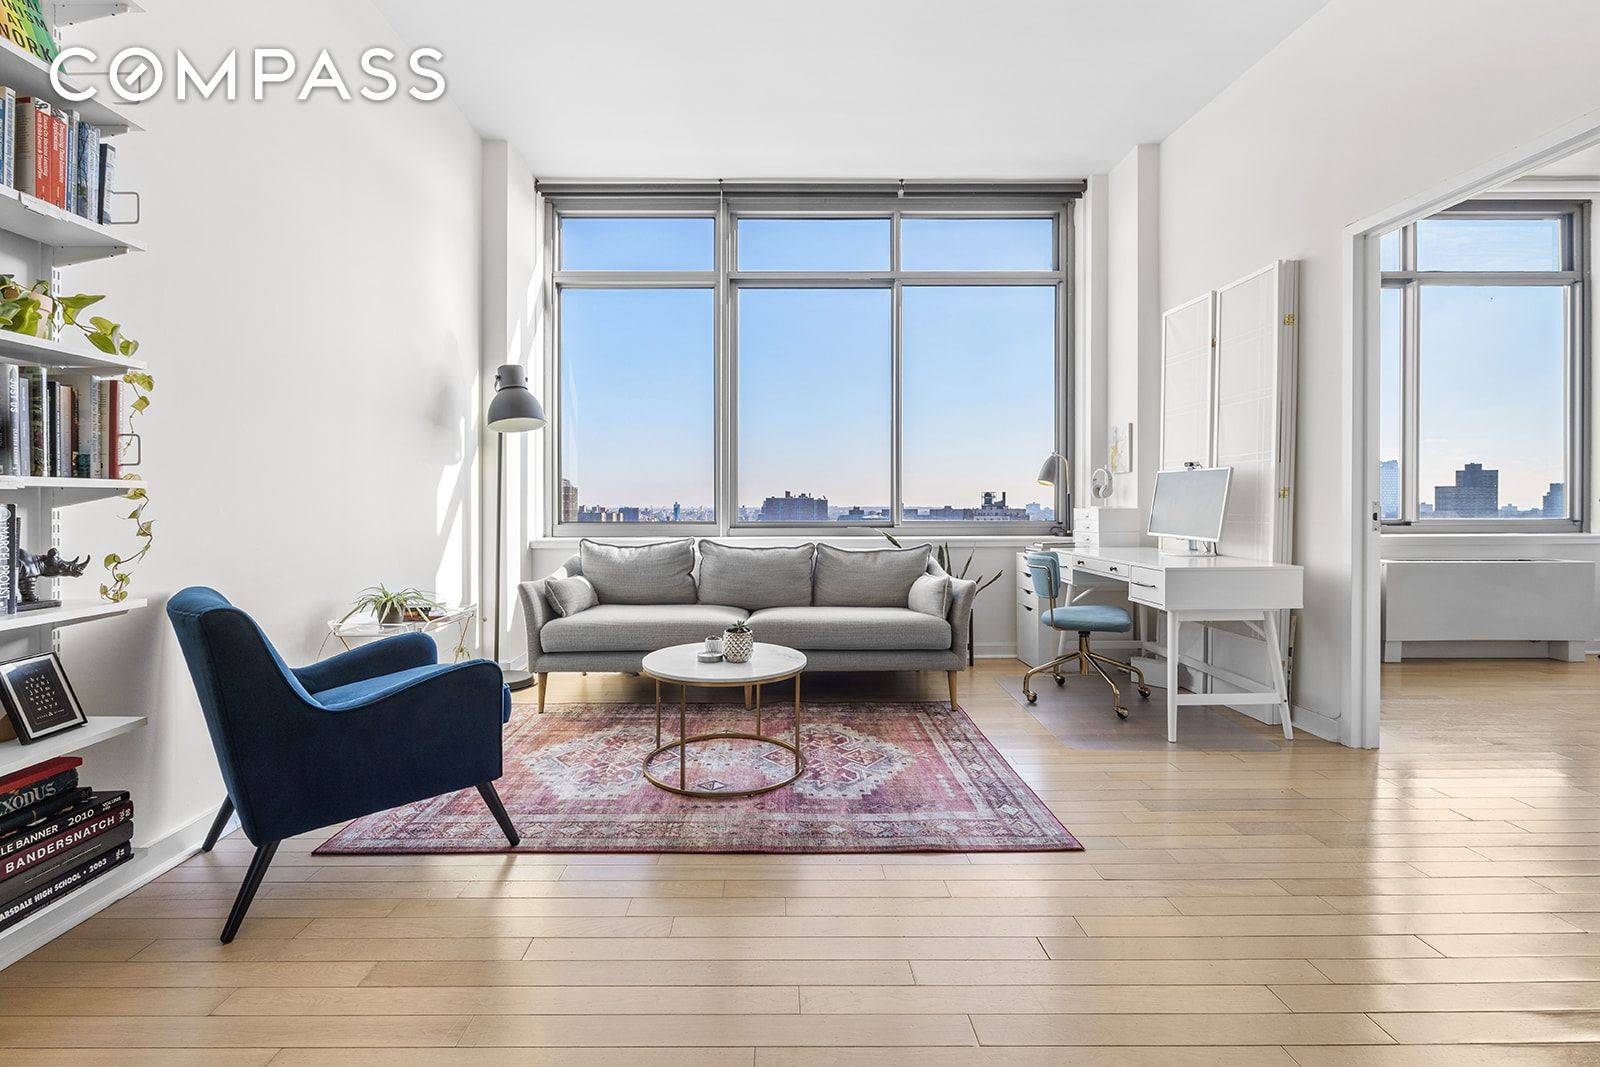 Views and sky abound in this sunny, high floor 2 bed 2 bath in prime Fort Greene.